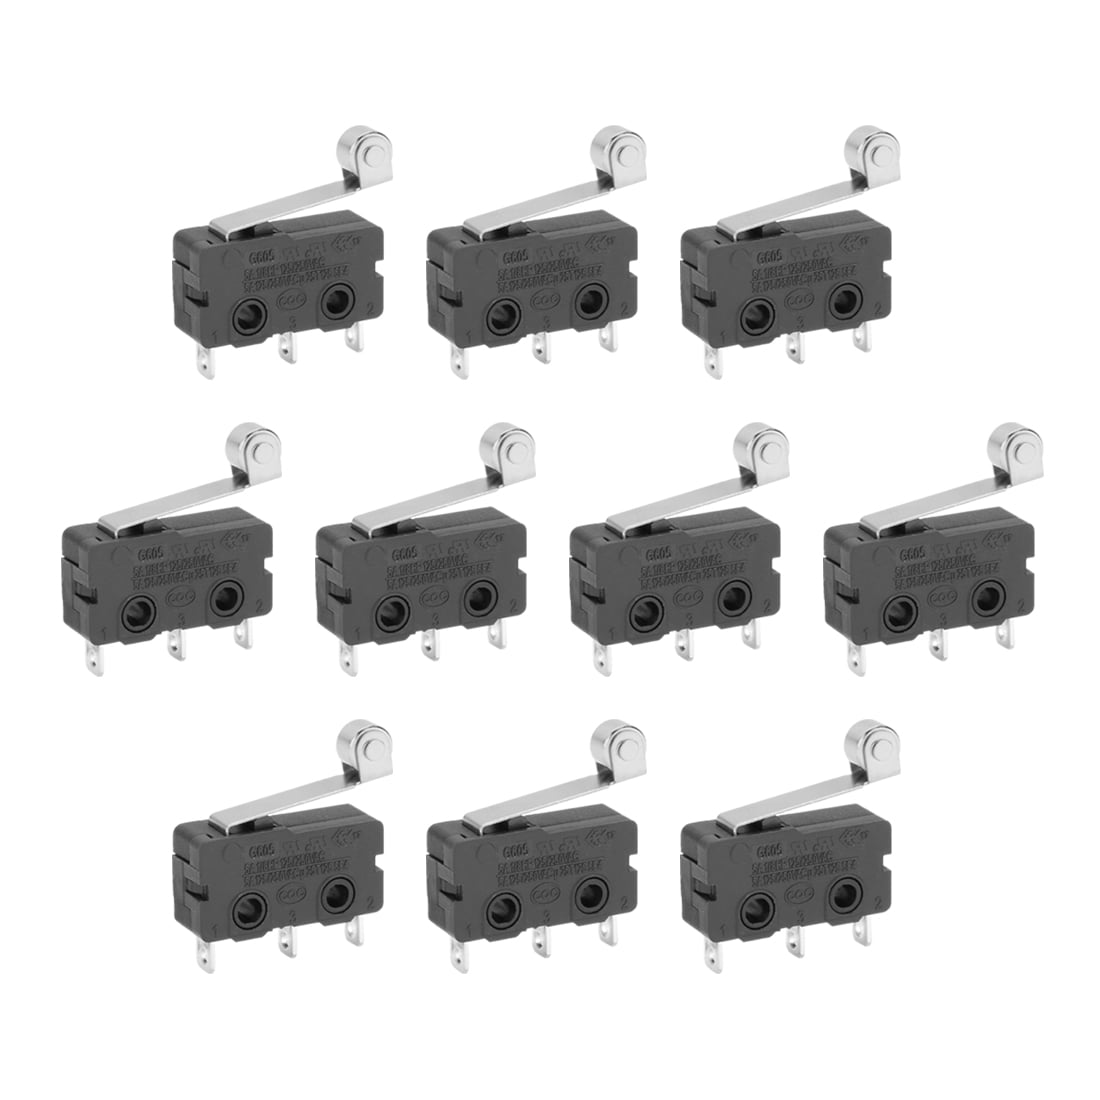 10 pc TEMCo Micro Limit Switch Long Roller Lever Arm SPDT Snap Action home LOT 